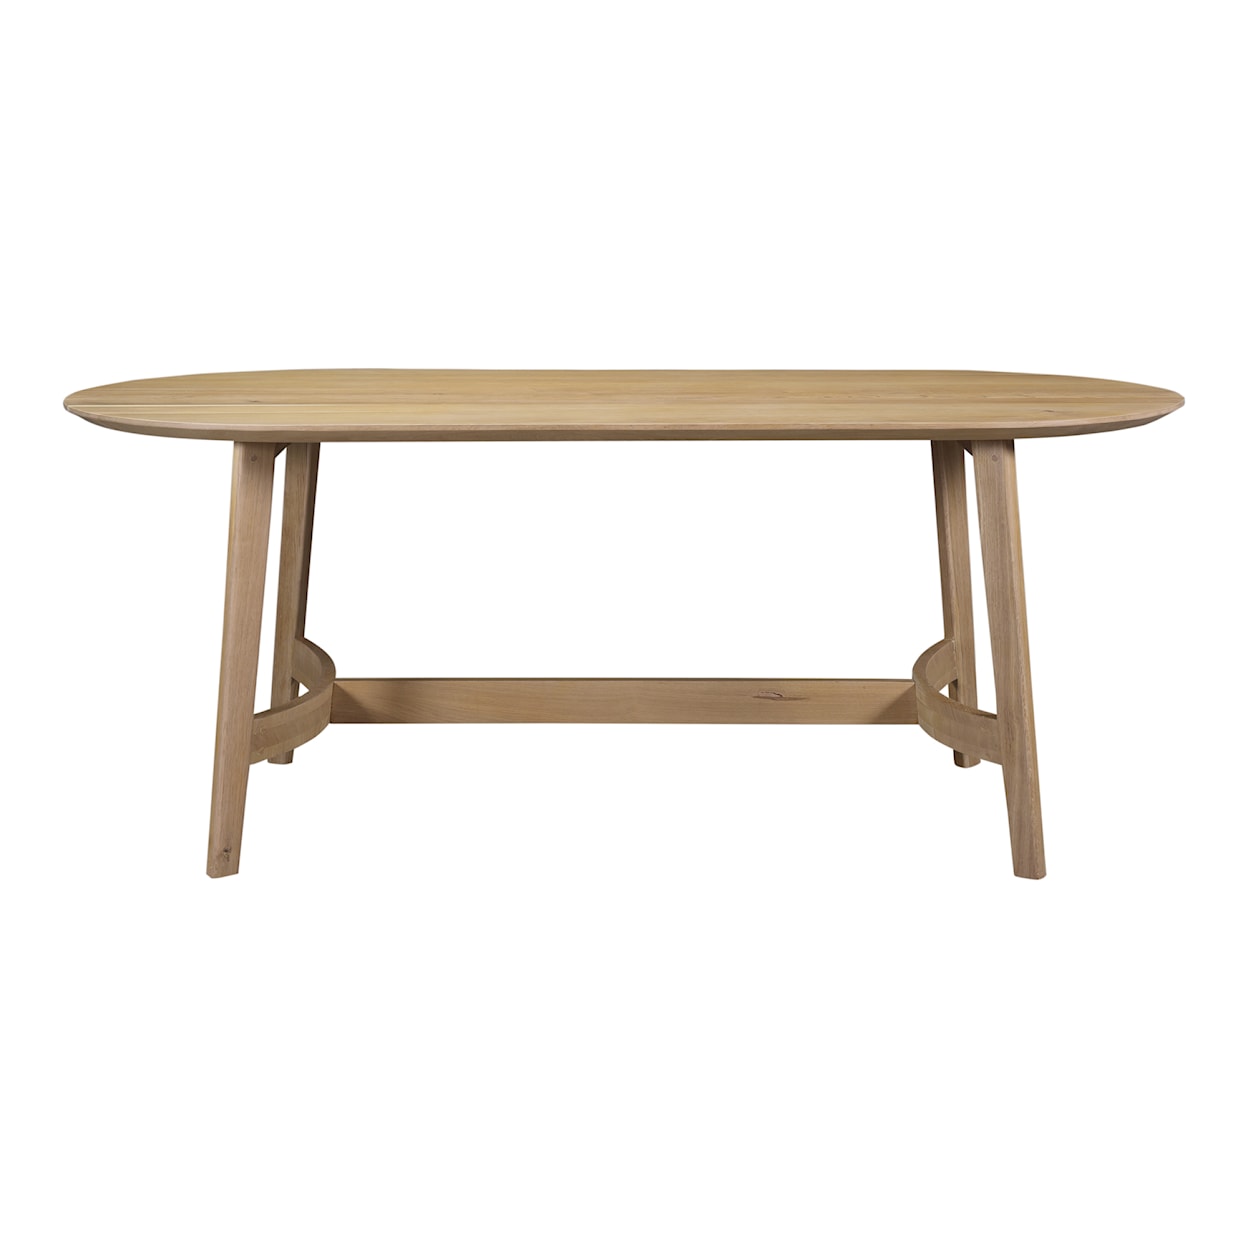 Moe's Home Collection Trie Trie Dining Table Small